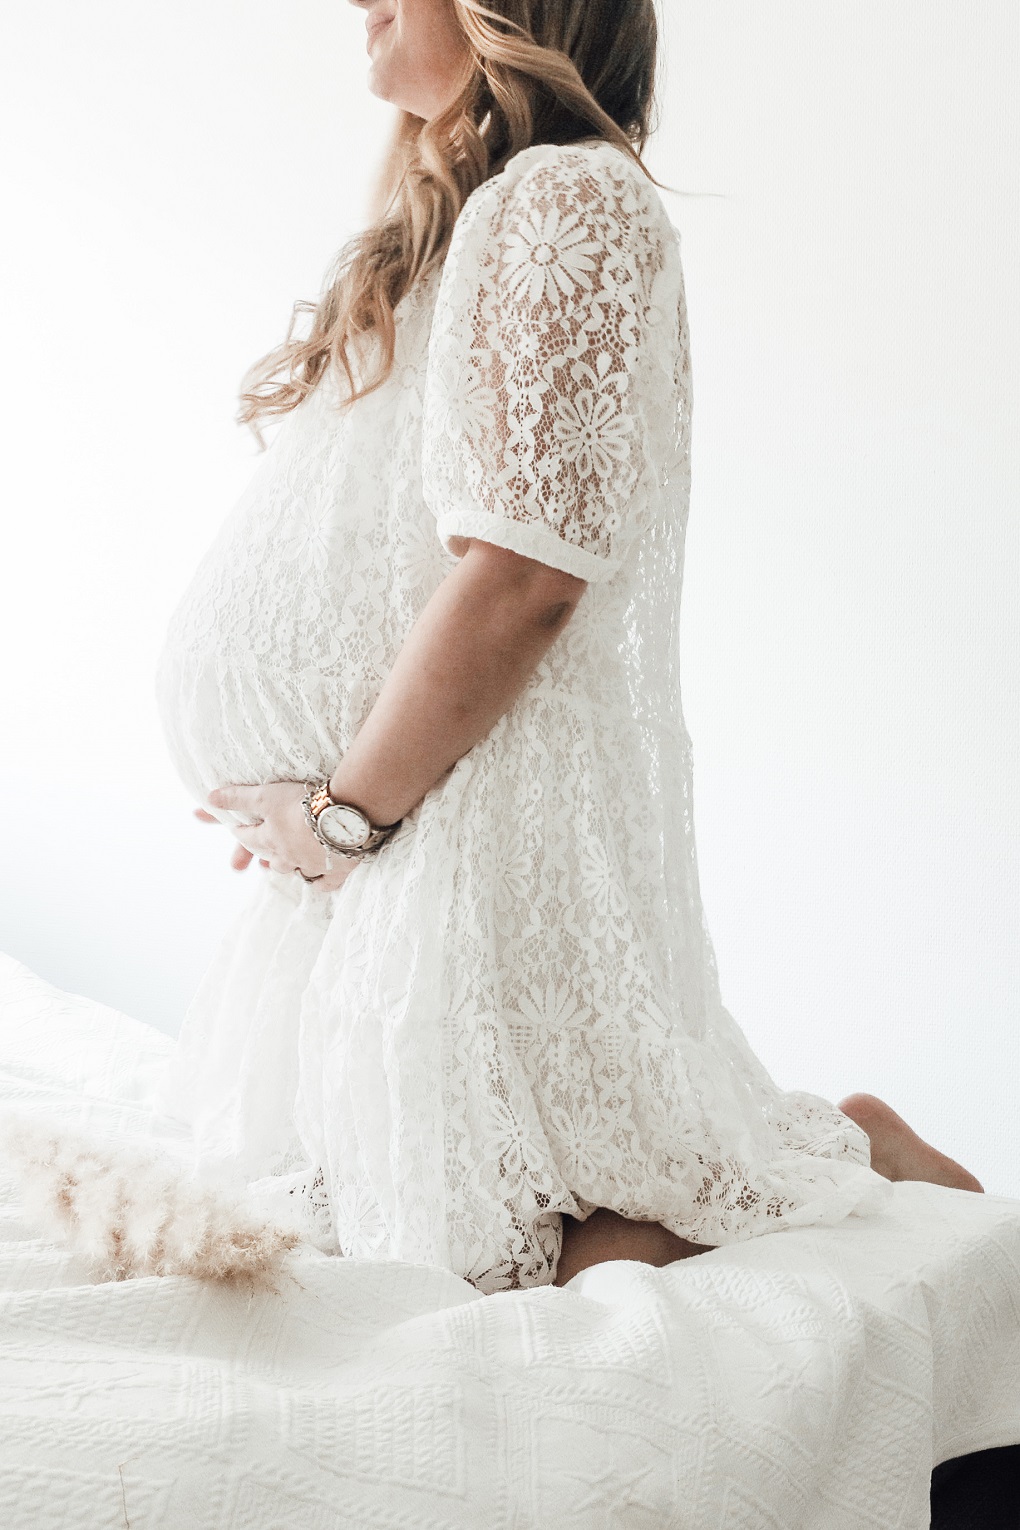 Reflections of an expecting mother, 1st pregnancy compared to current pregnancy elisabeth rundlöf